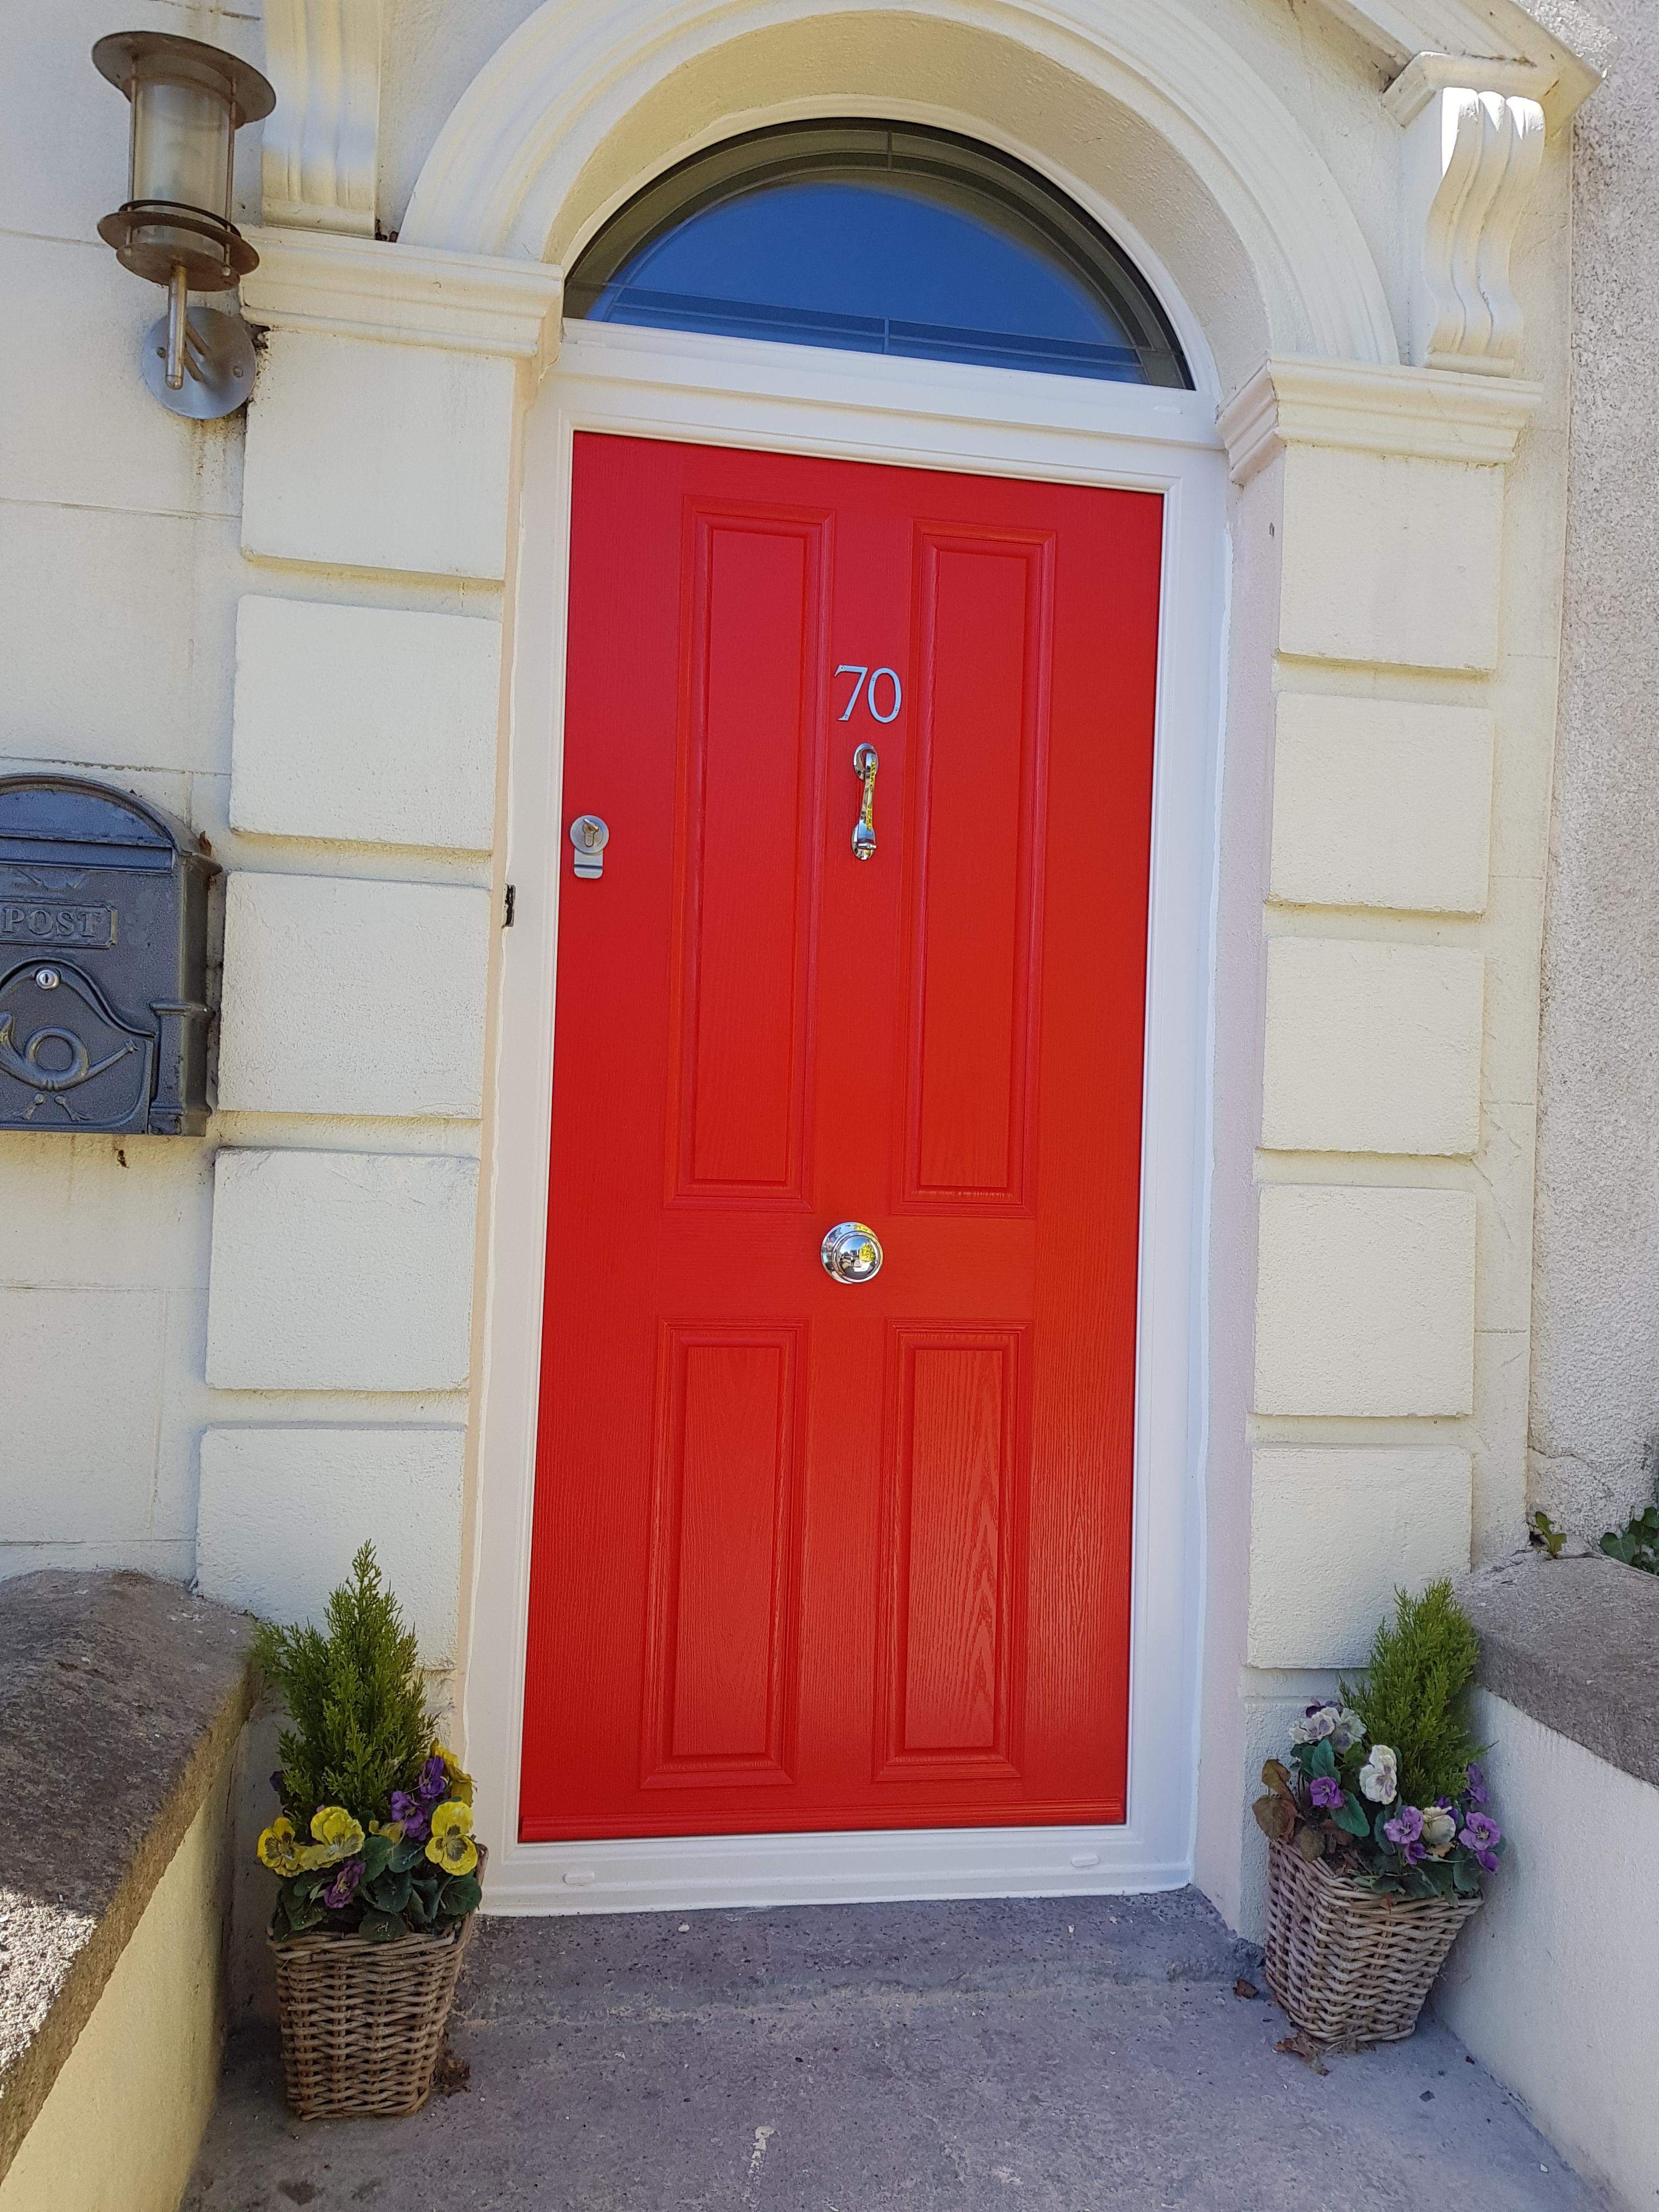 APEER APM1 DOOR 
TRAFFIC RED WITH WHITE FRAME